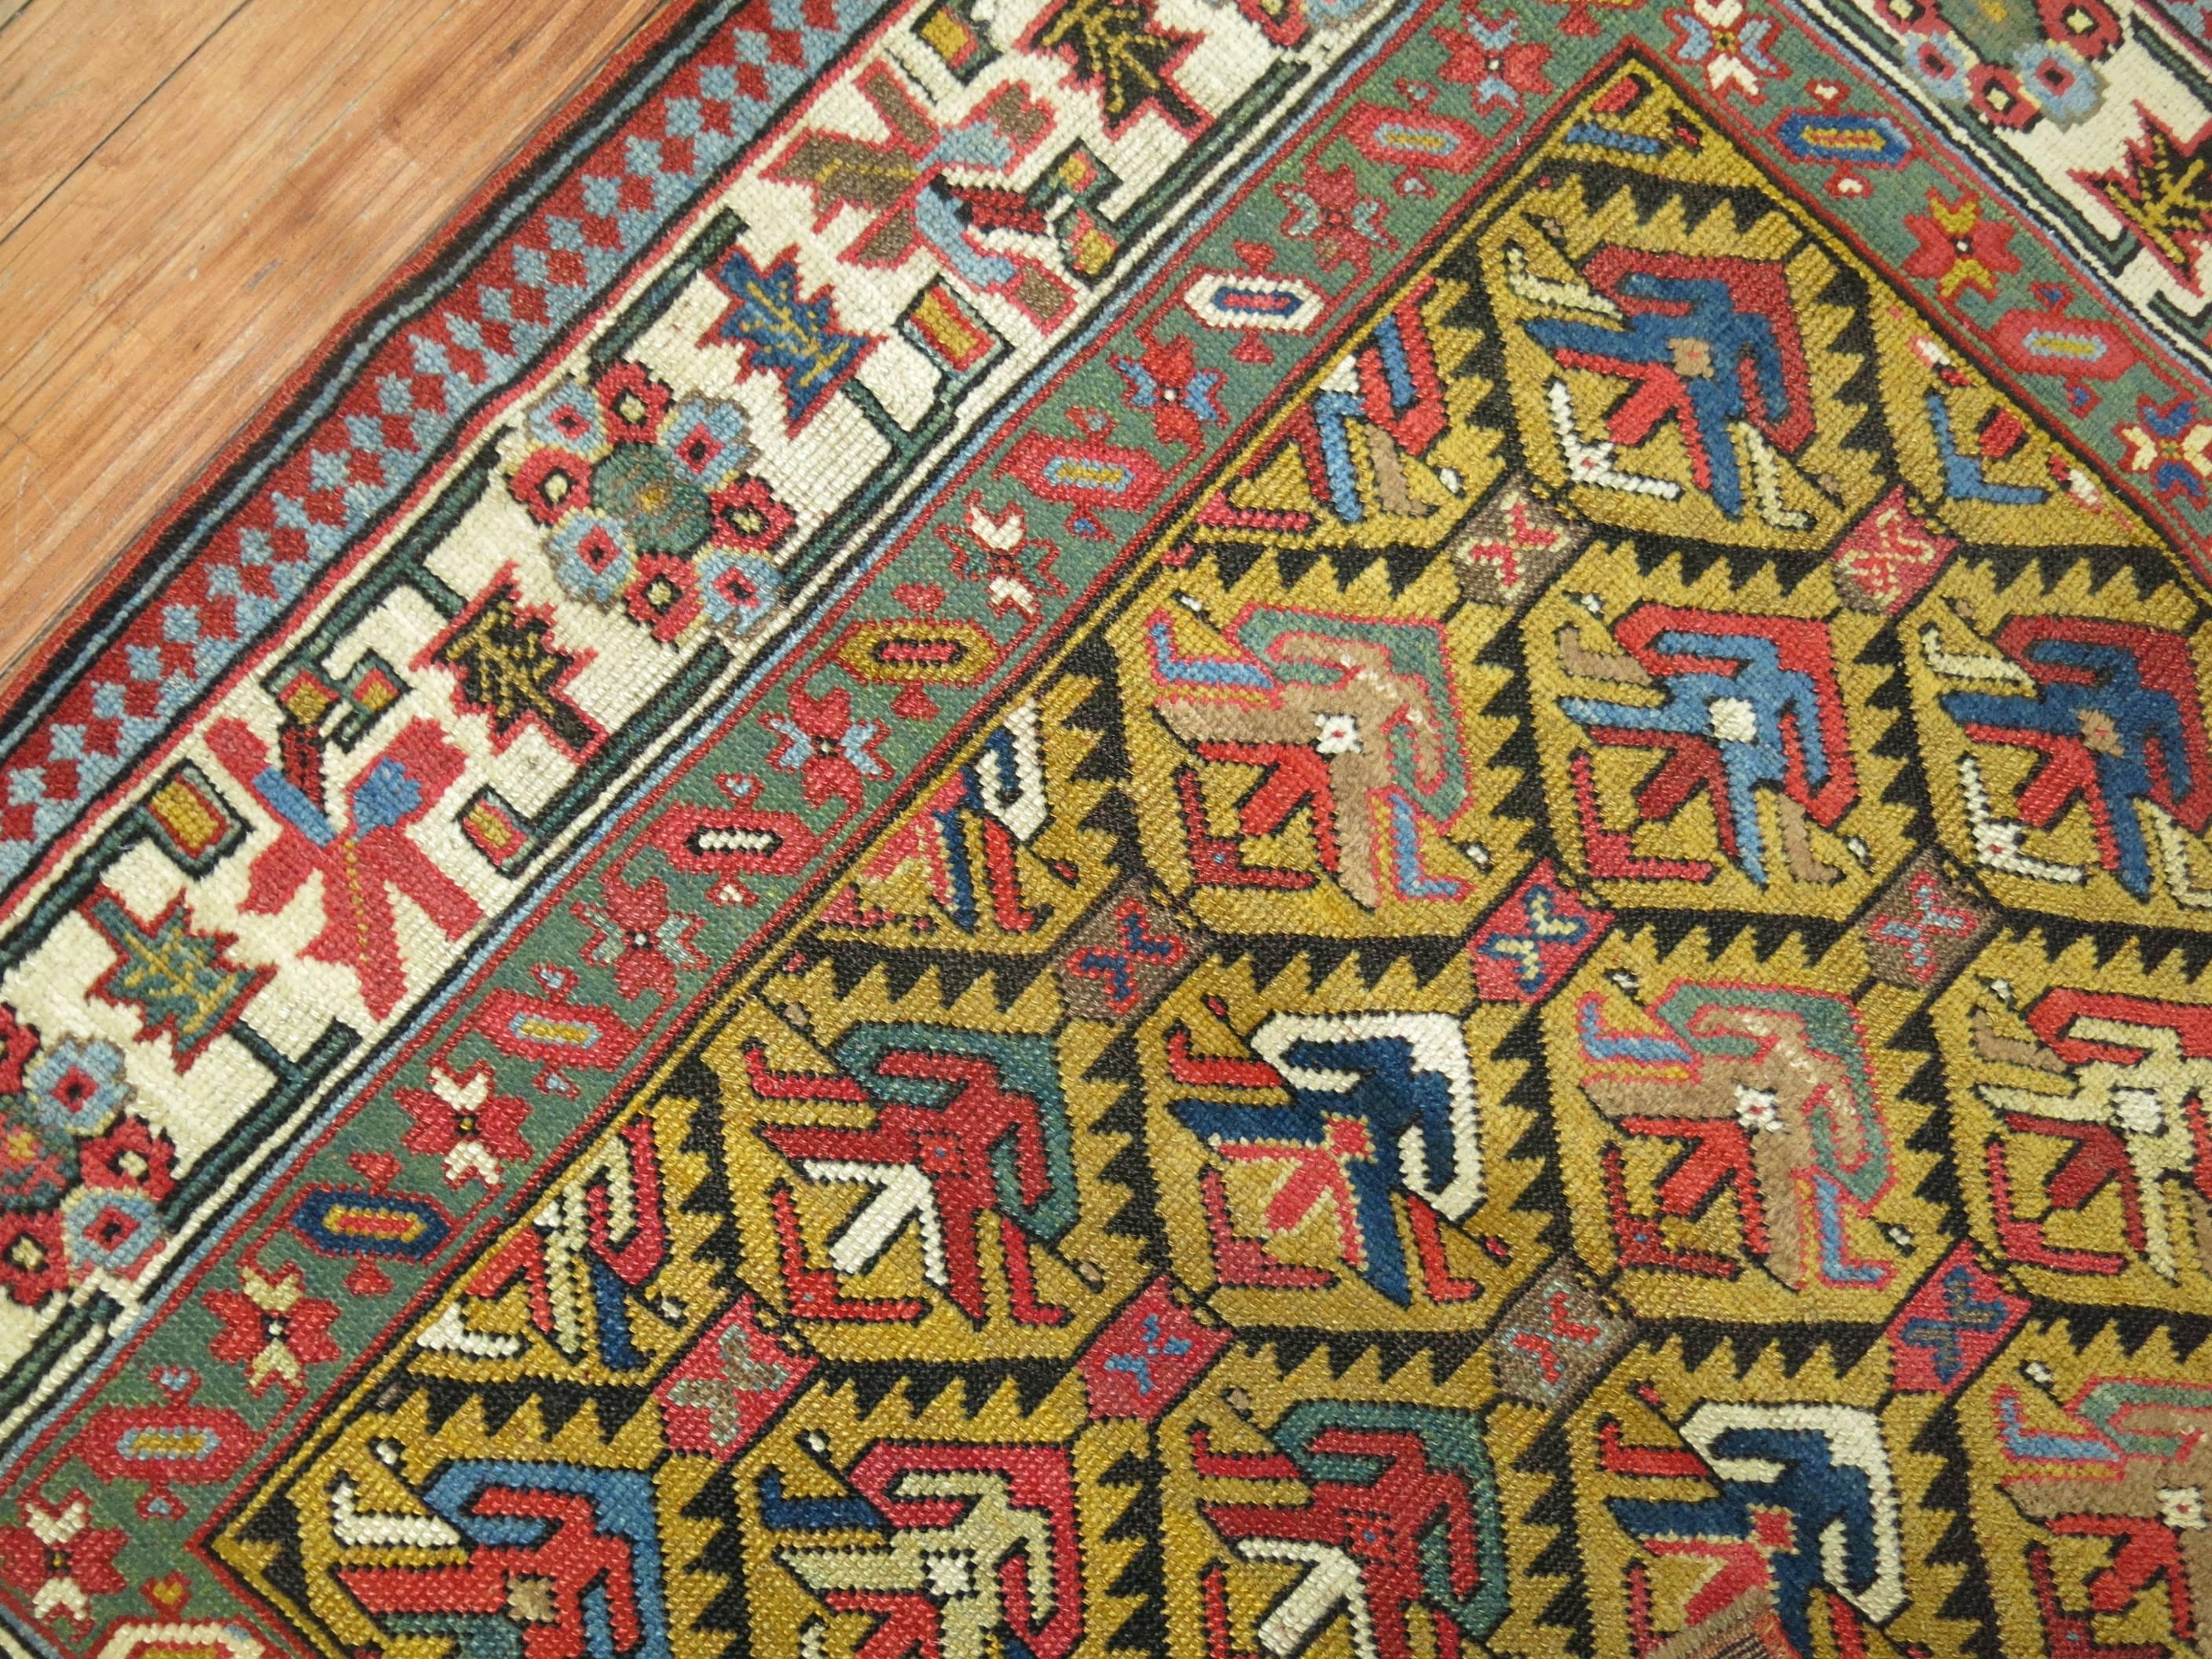 Rare size antique Caucasian Shirvan rug with a mustard ground and ivory border.

Shirvan is located to the south of the Caucasus mountain range and is to the east of Gendje and to the west of the Baku peninsula. Local weaving tradition in this